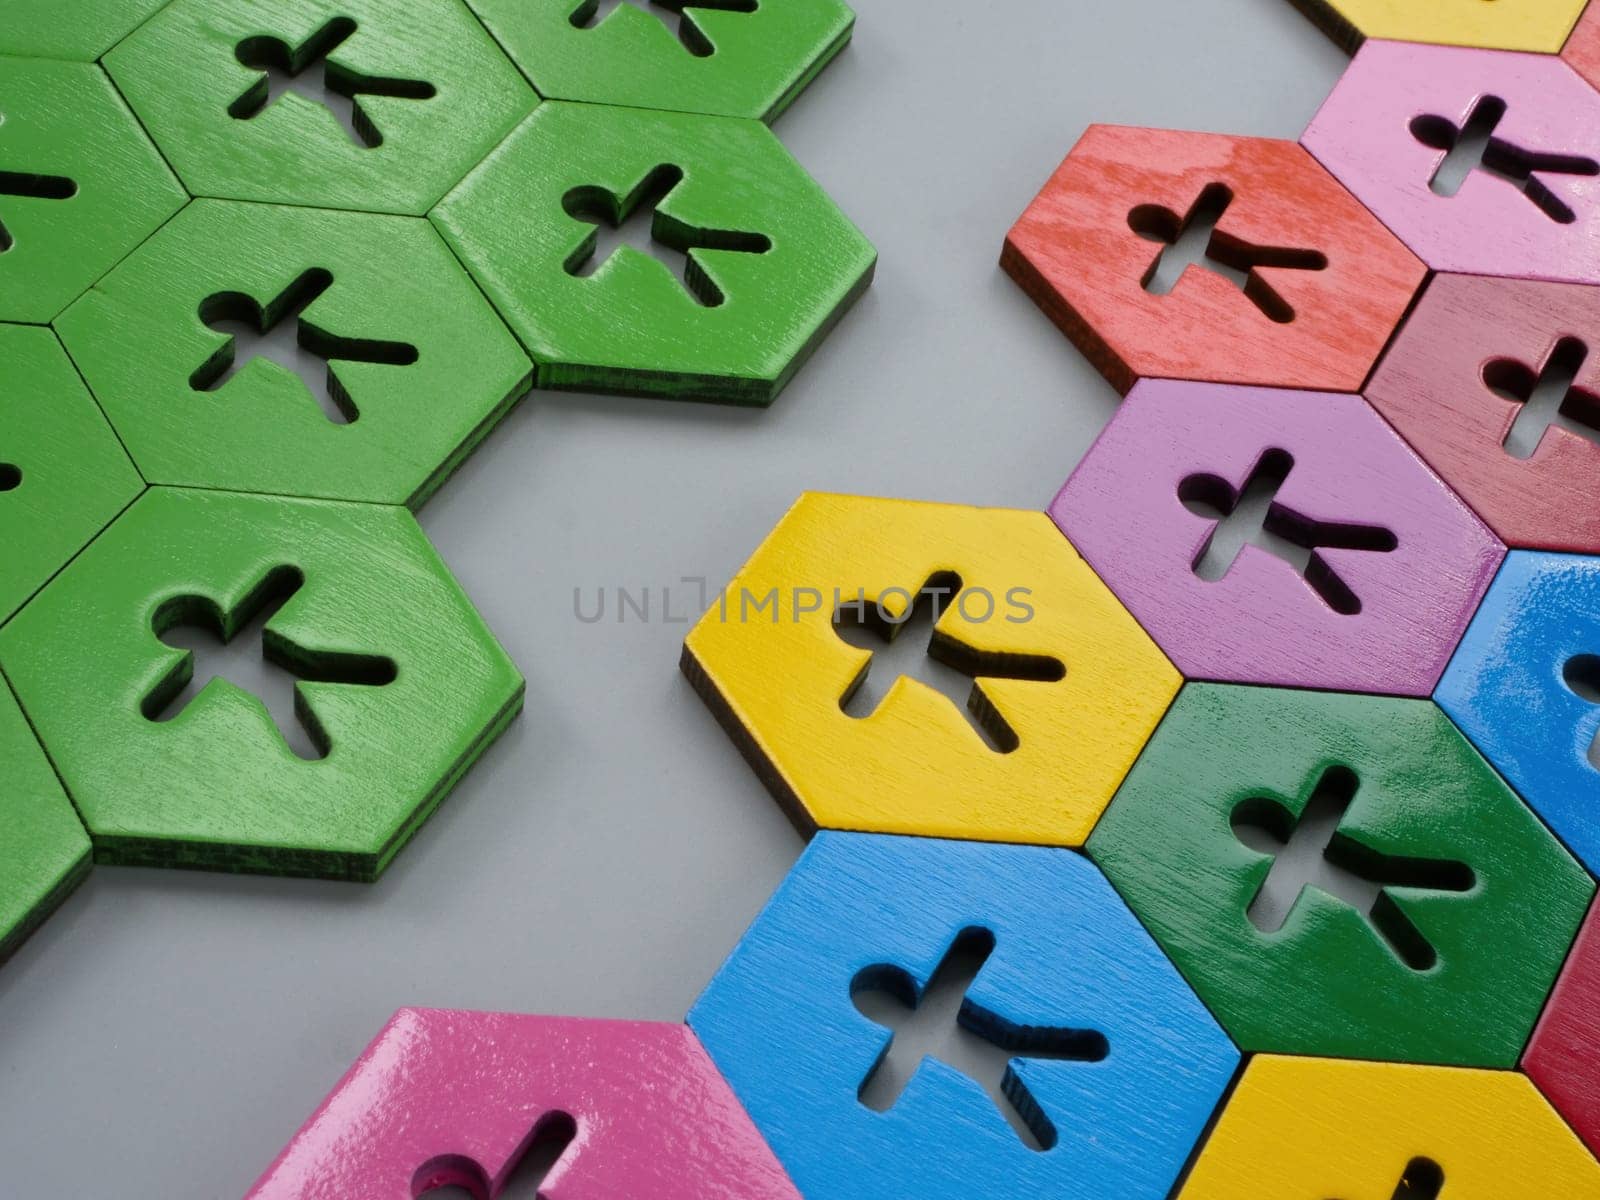 Hexagons with figures of the same color and multi-colored as a symbol of diversity. by designer491